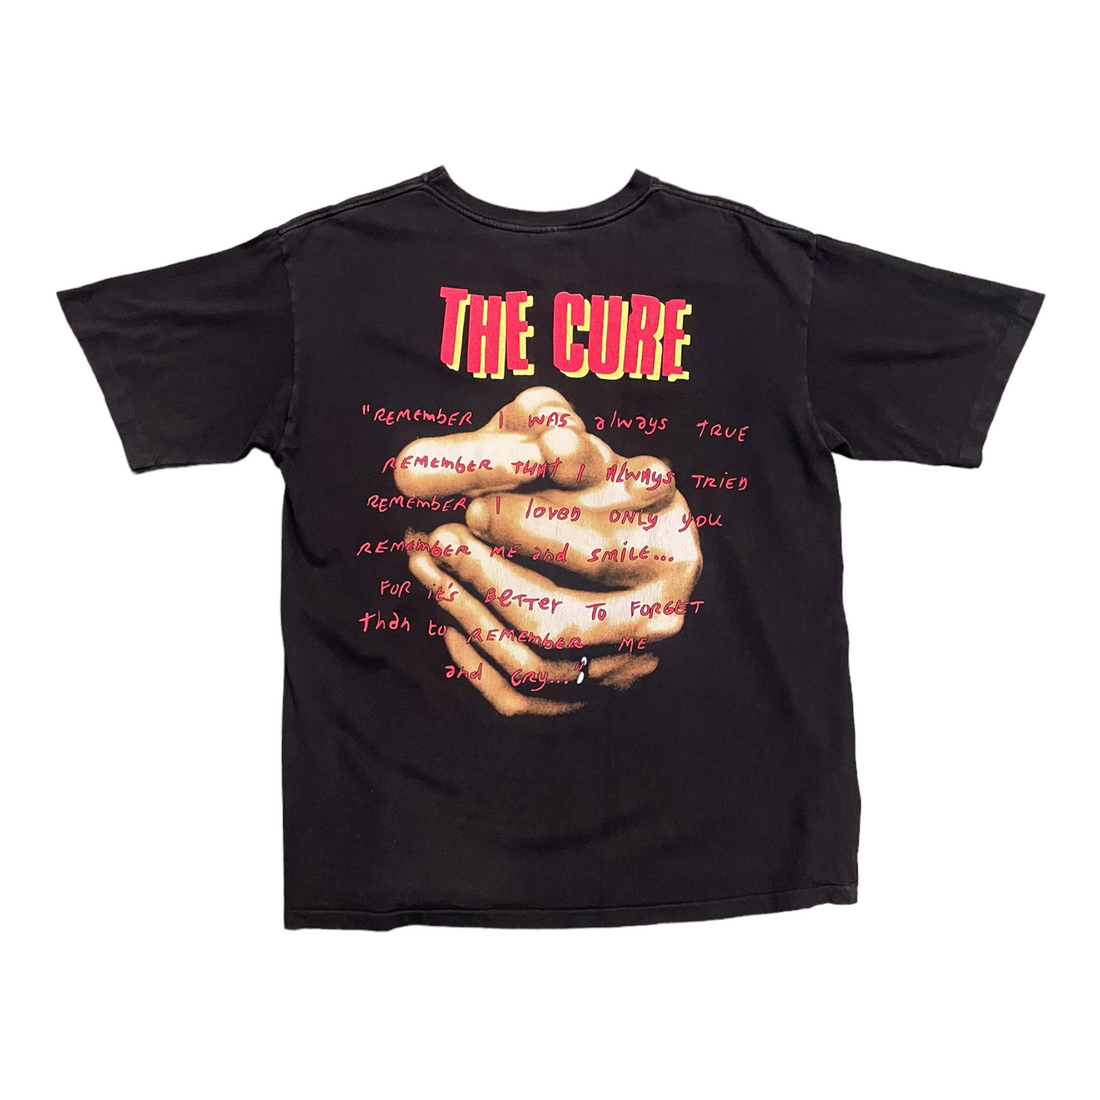 THE CURE TEE BLACK ‘XL’ - 1990S